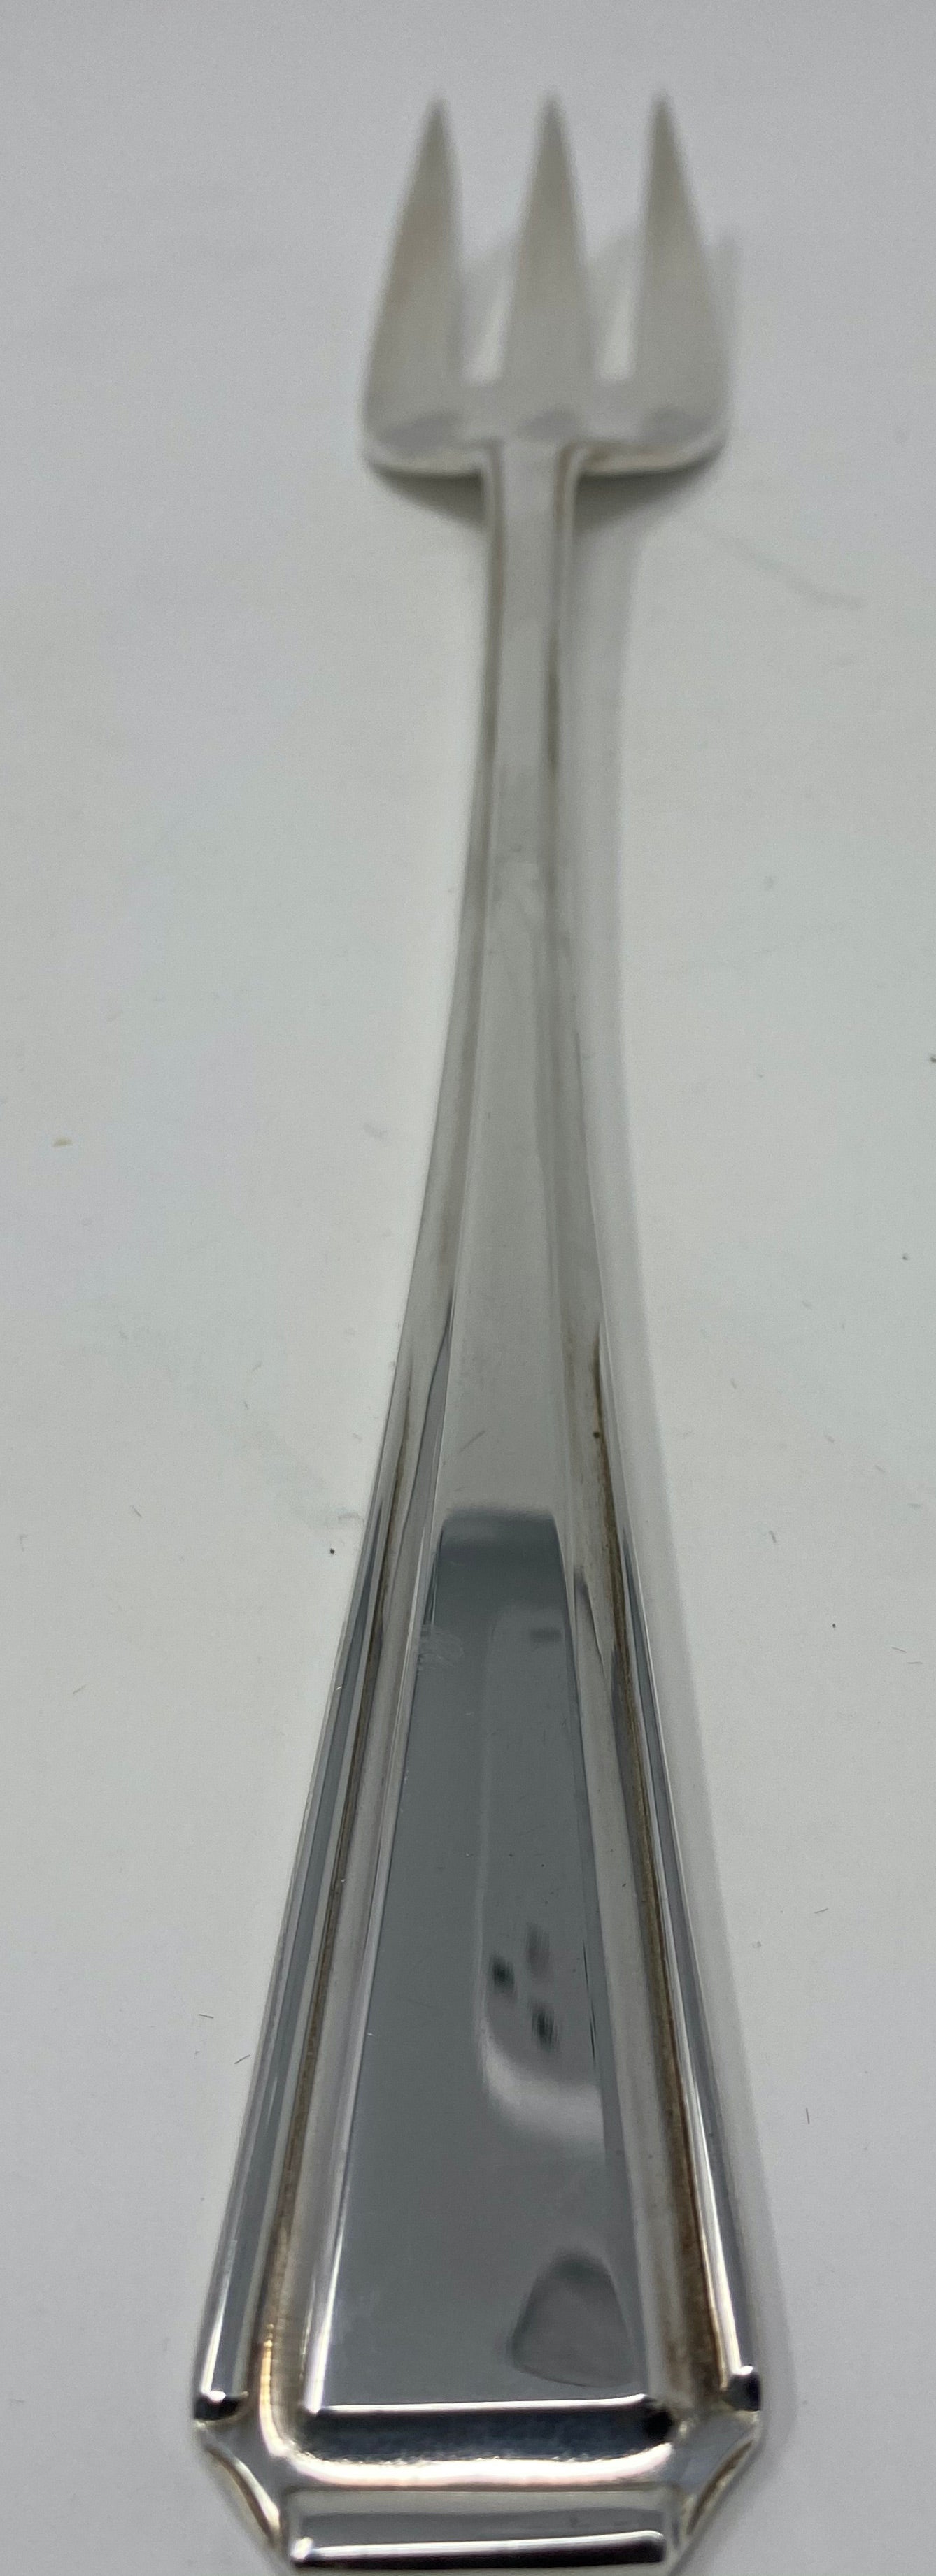 Silver Plated Serving Fork